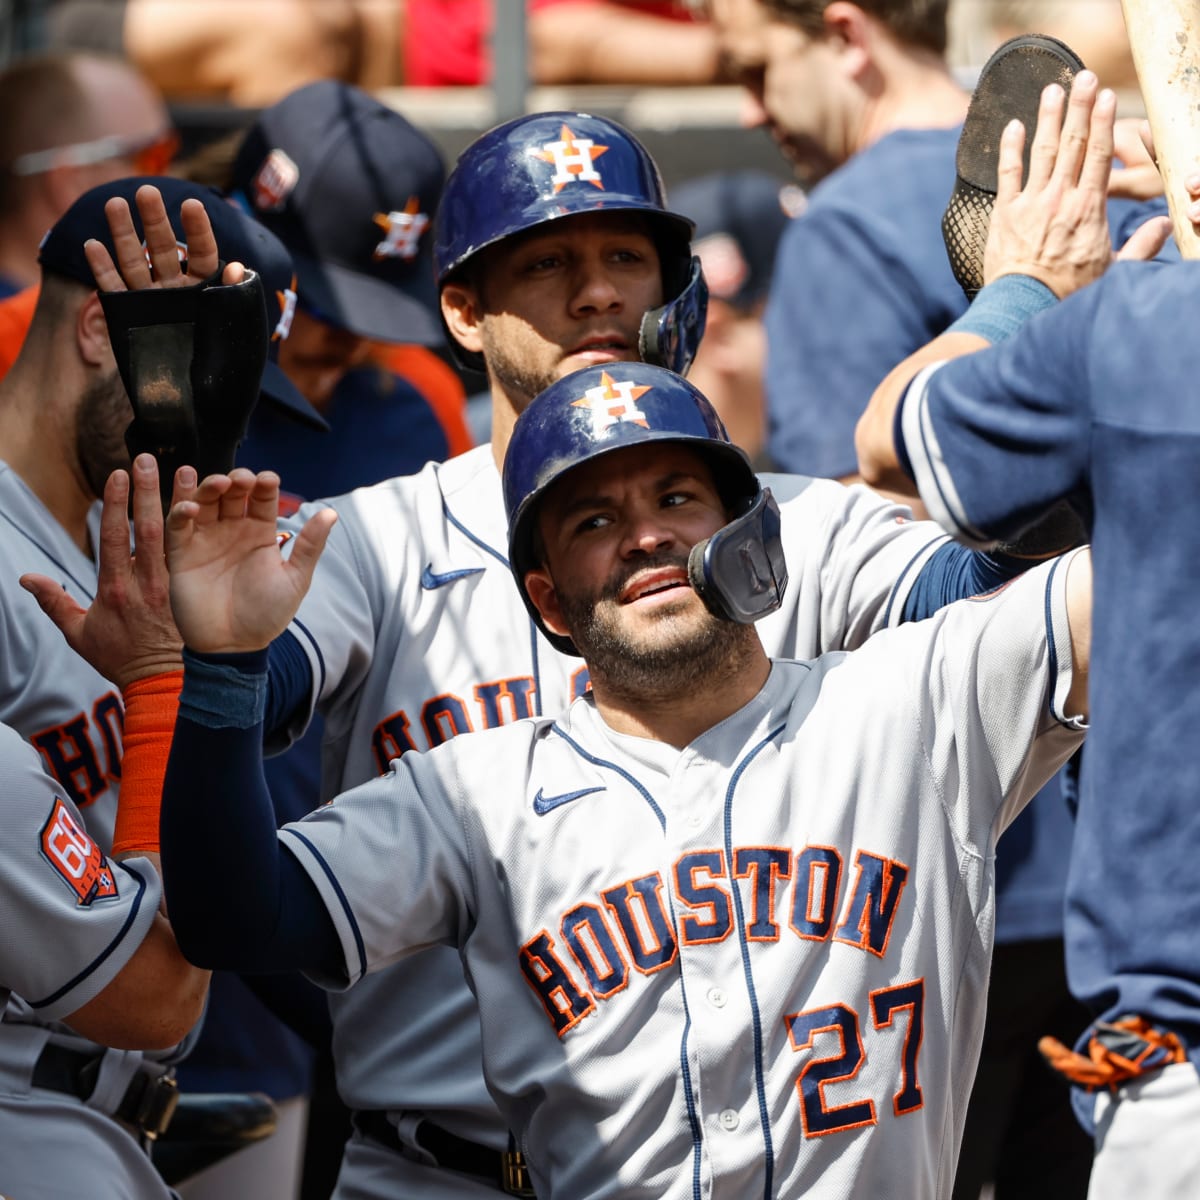 Astros rookie Urquidy makes history with dominant Game 4 start